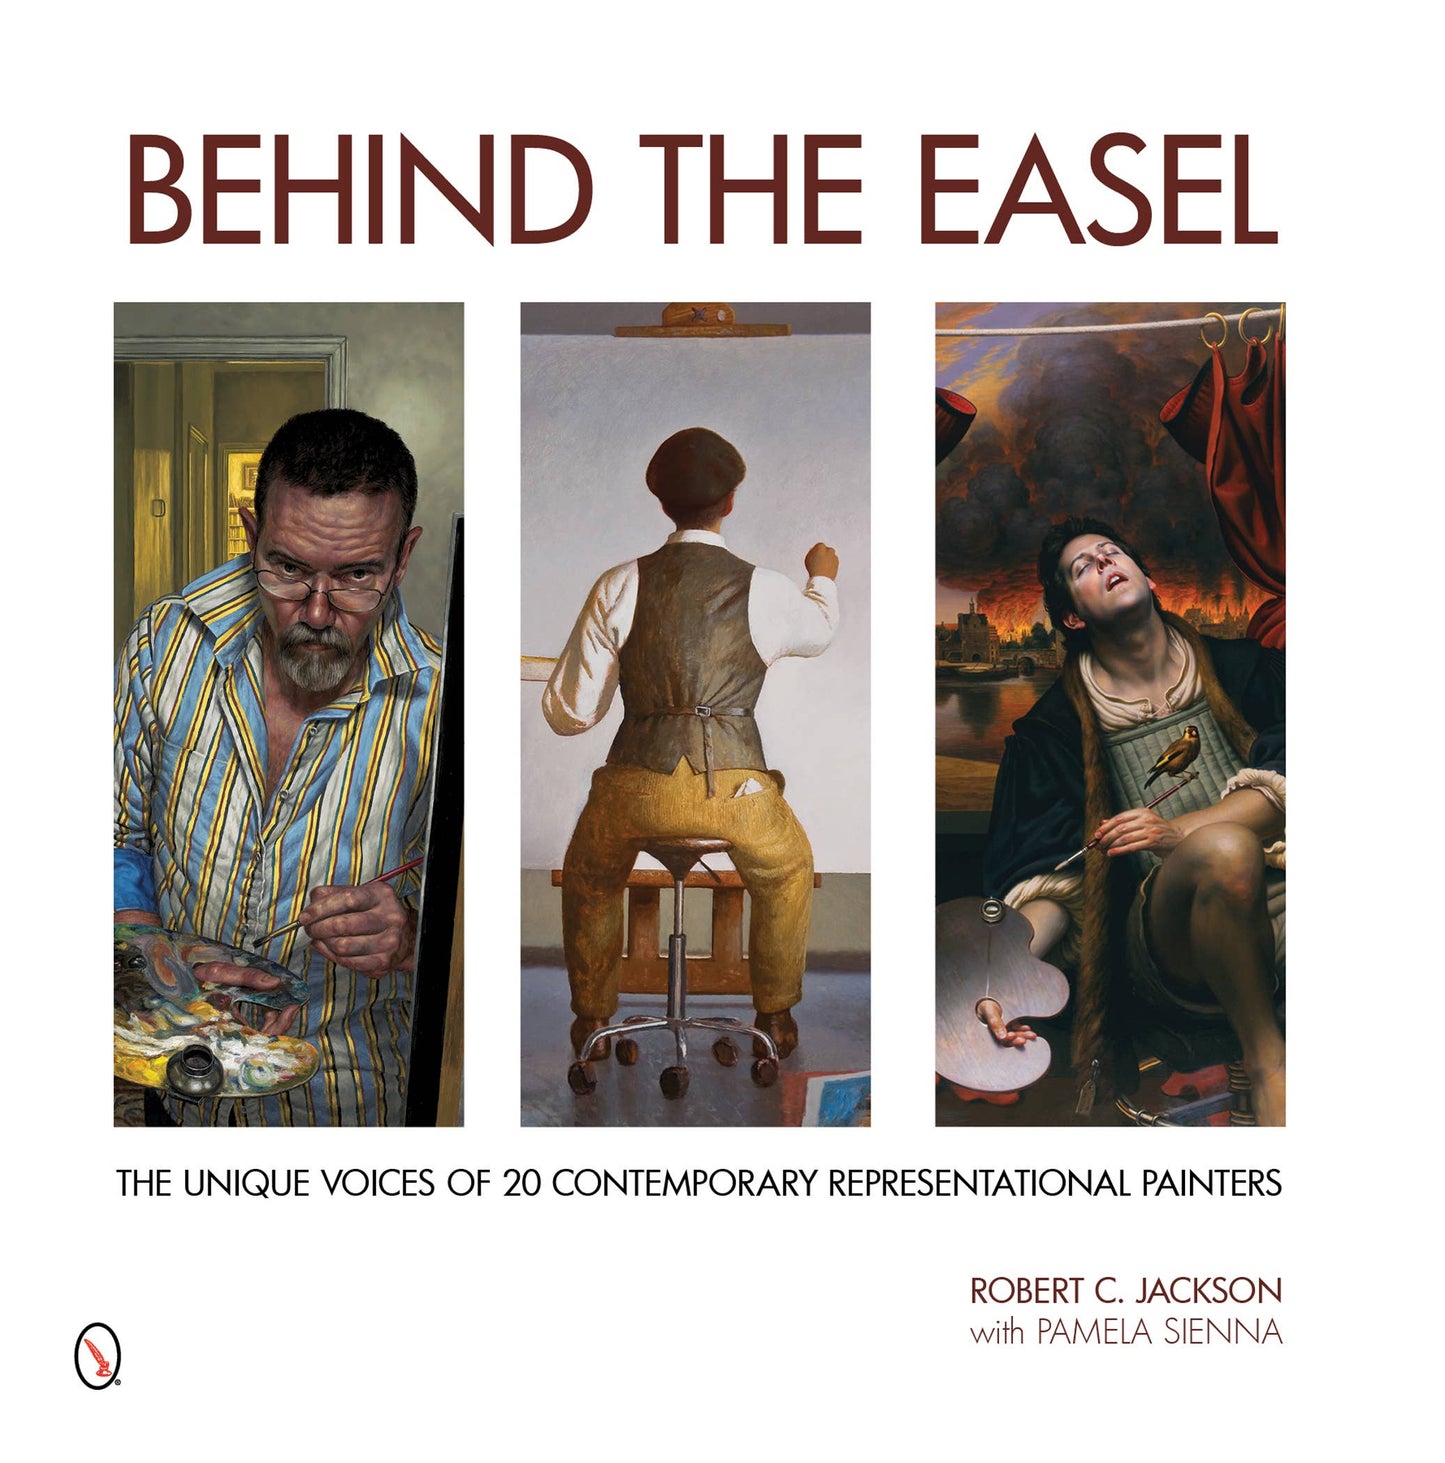 Behind the Easel